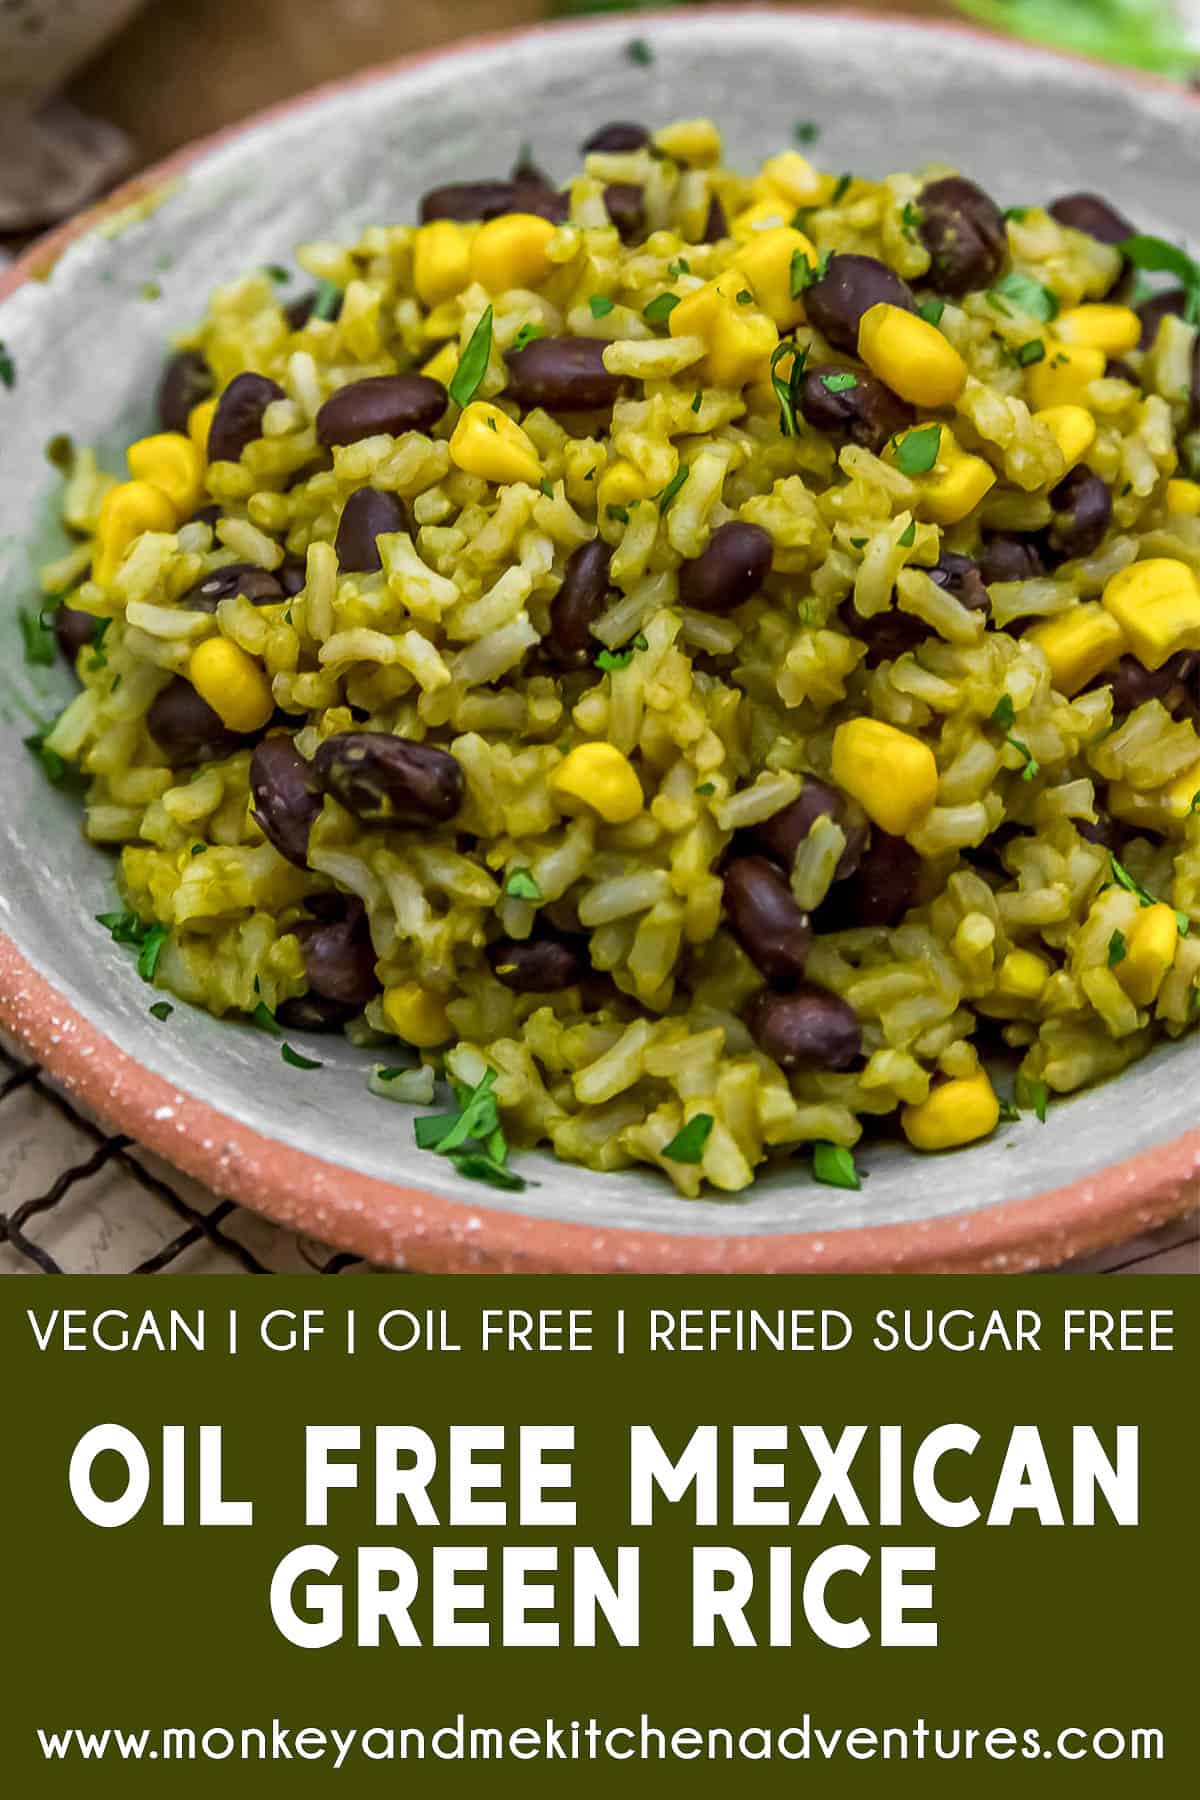 Oil-Free Mexican Green Rice with text description